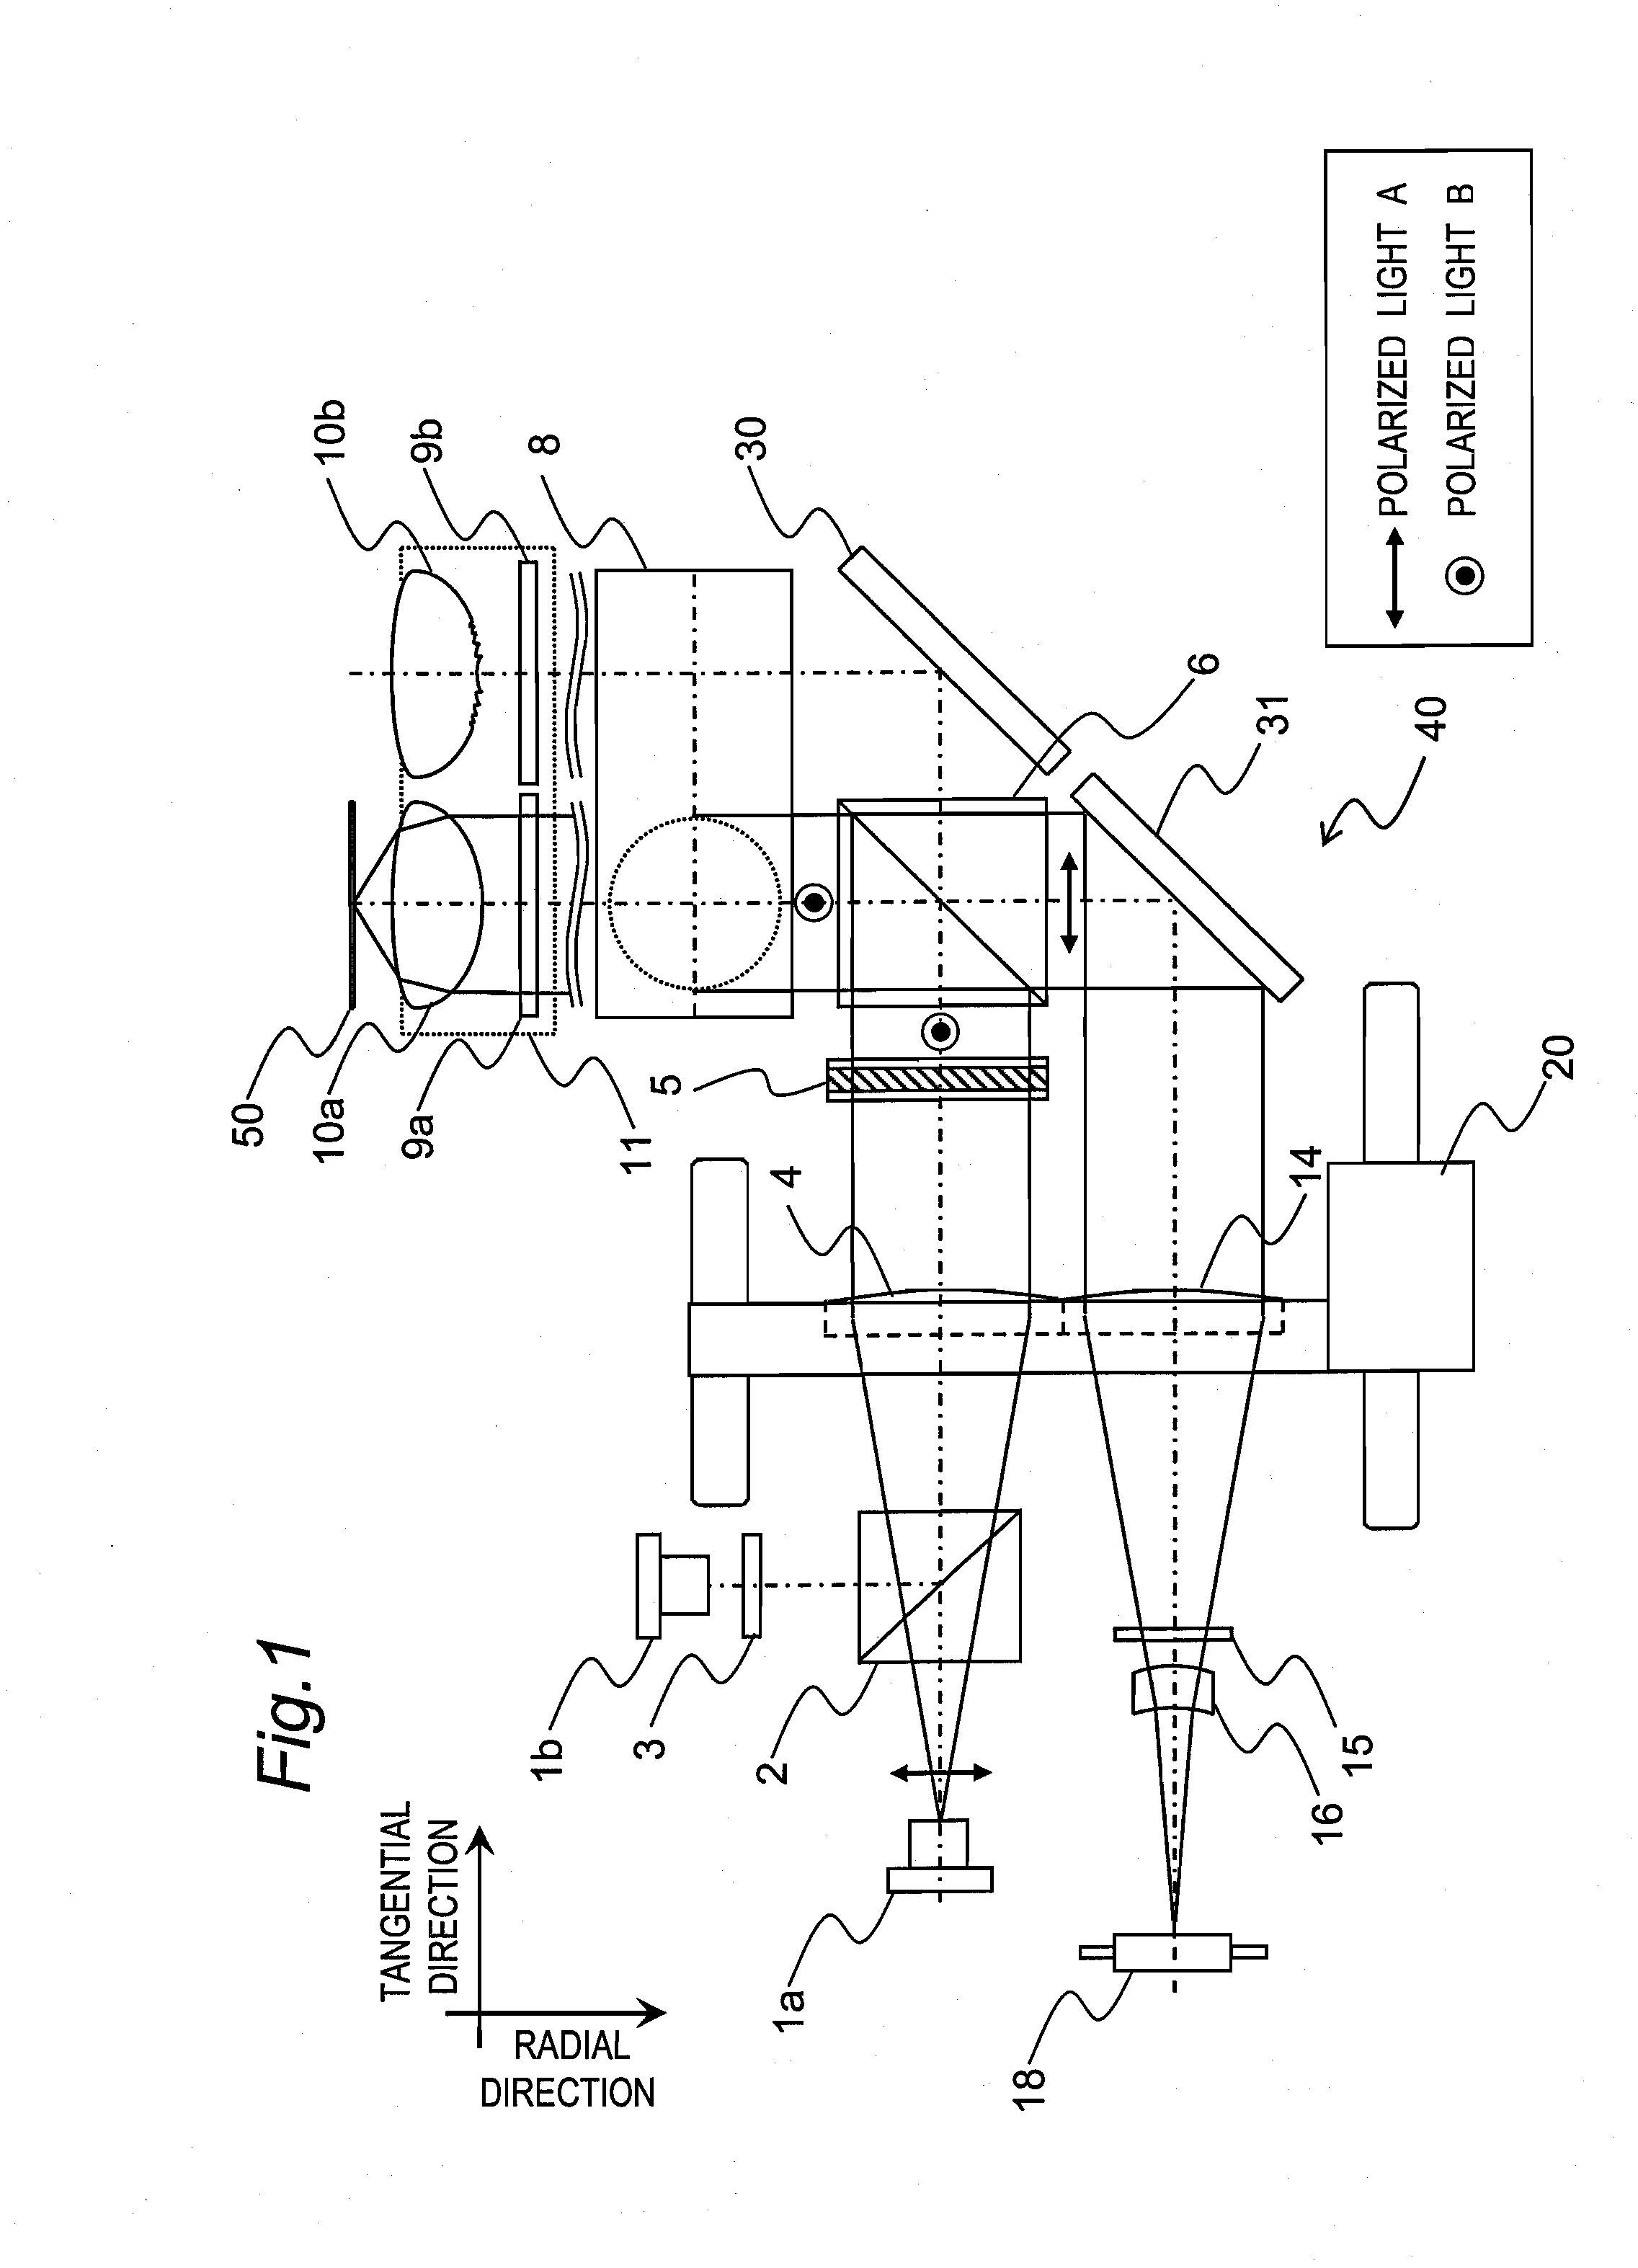 Optical disc drive and optical information system